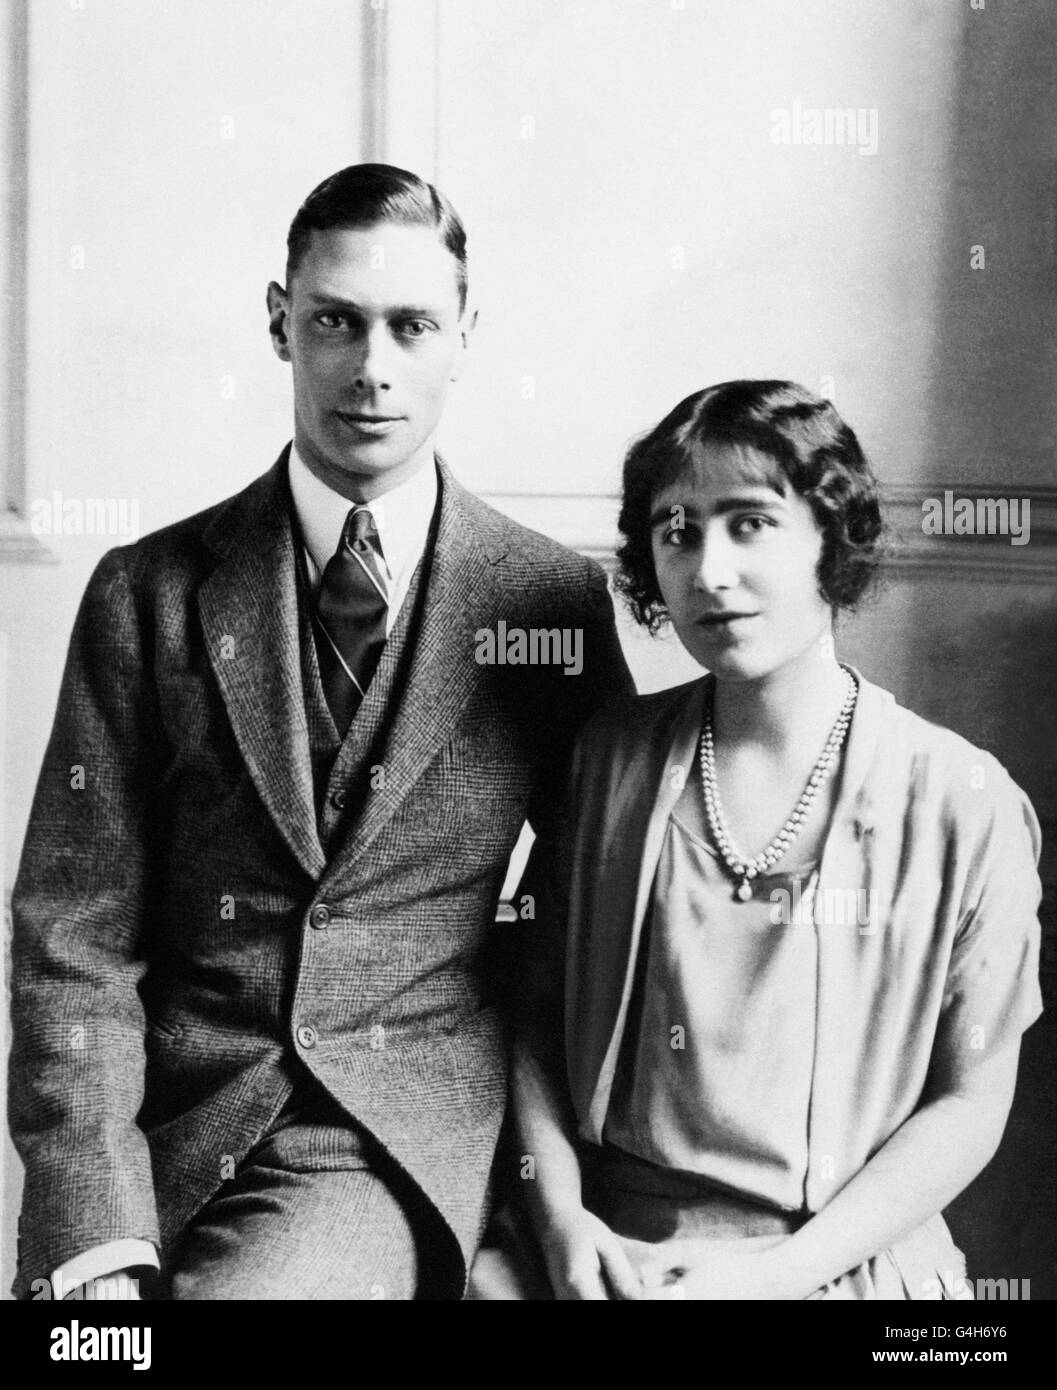 Prince Albert, Duke of York, (later King George VI) with Lady Elizabeth Bowes-Lyon, (later Queen Elizabeth)during their long courtship. They are engaged to be married. Stock Photo